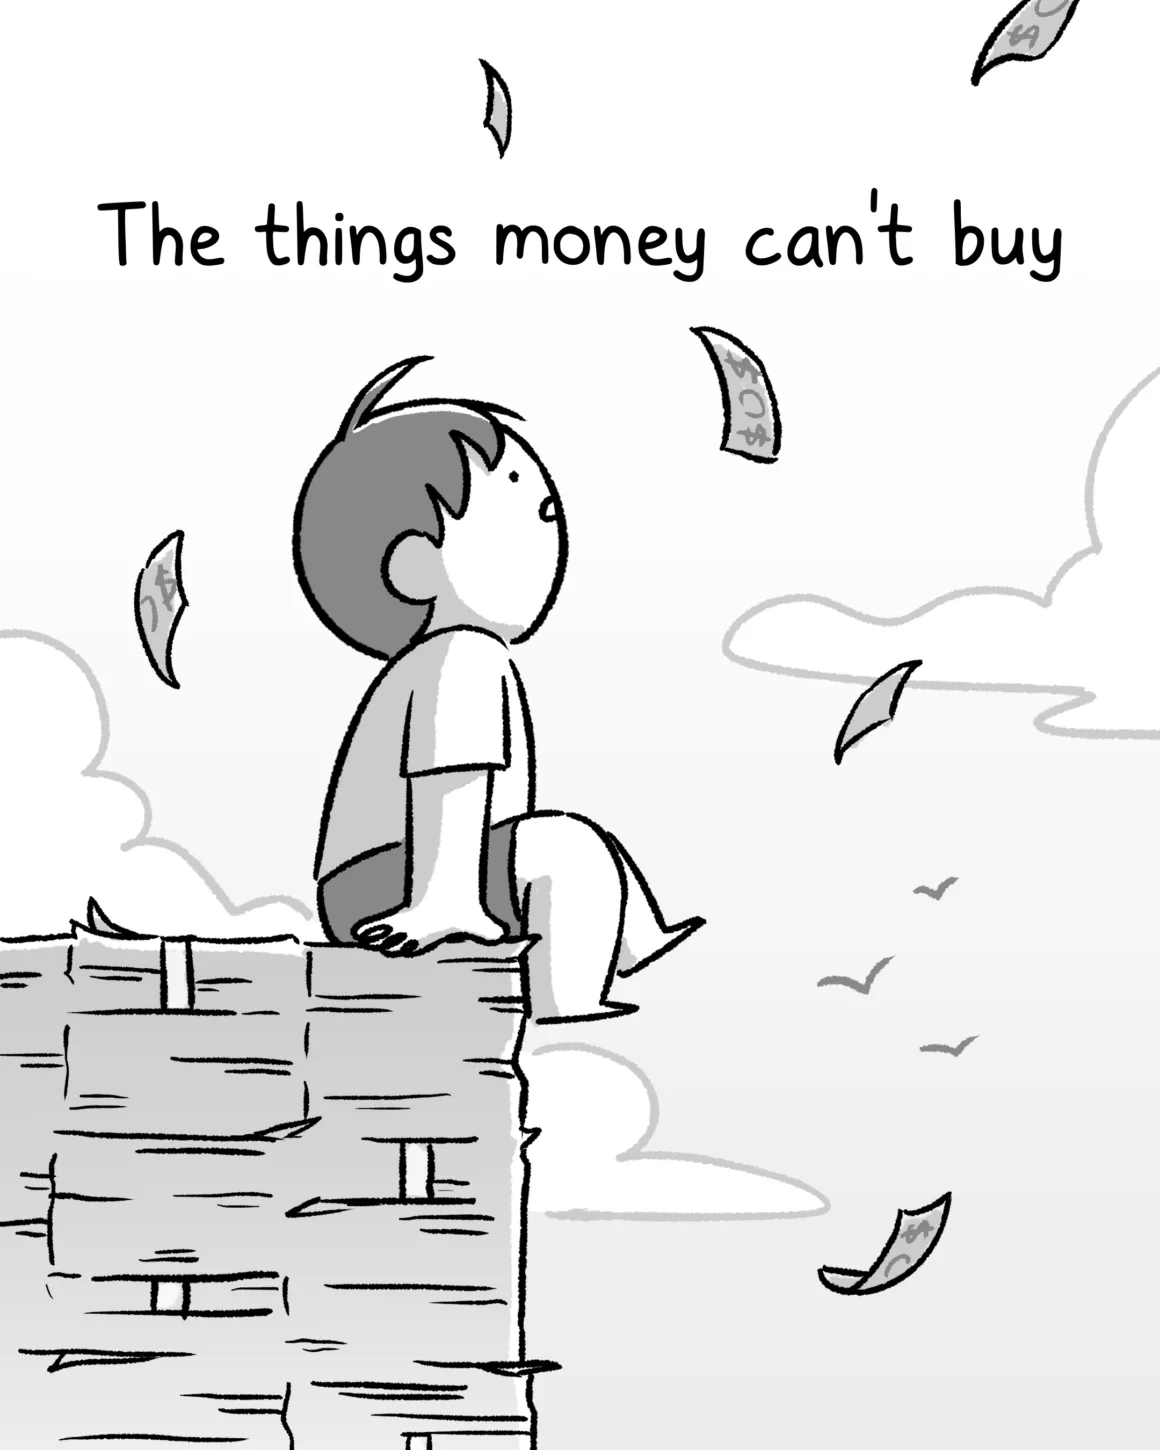 The Things Money Can’t Buy